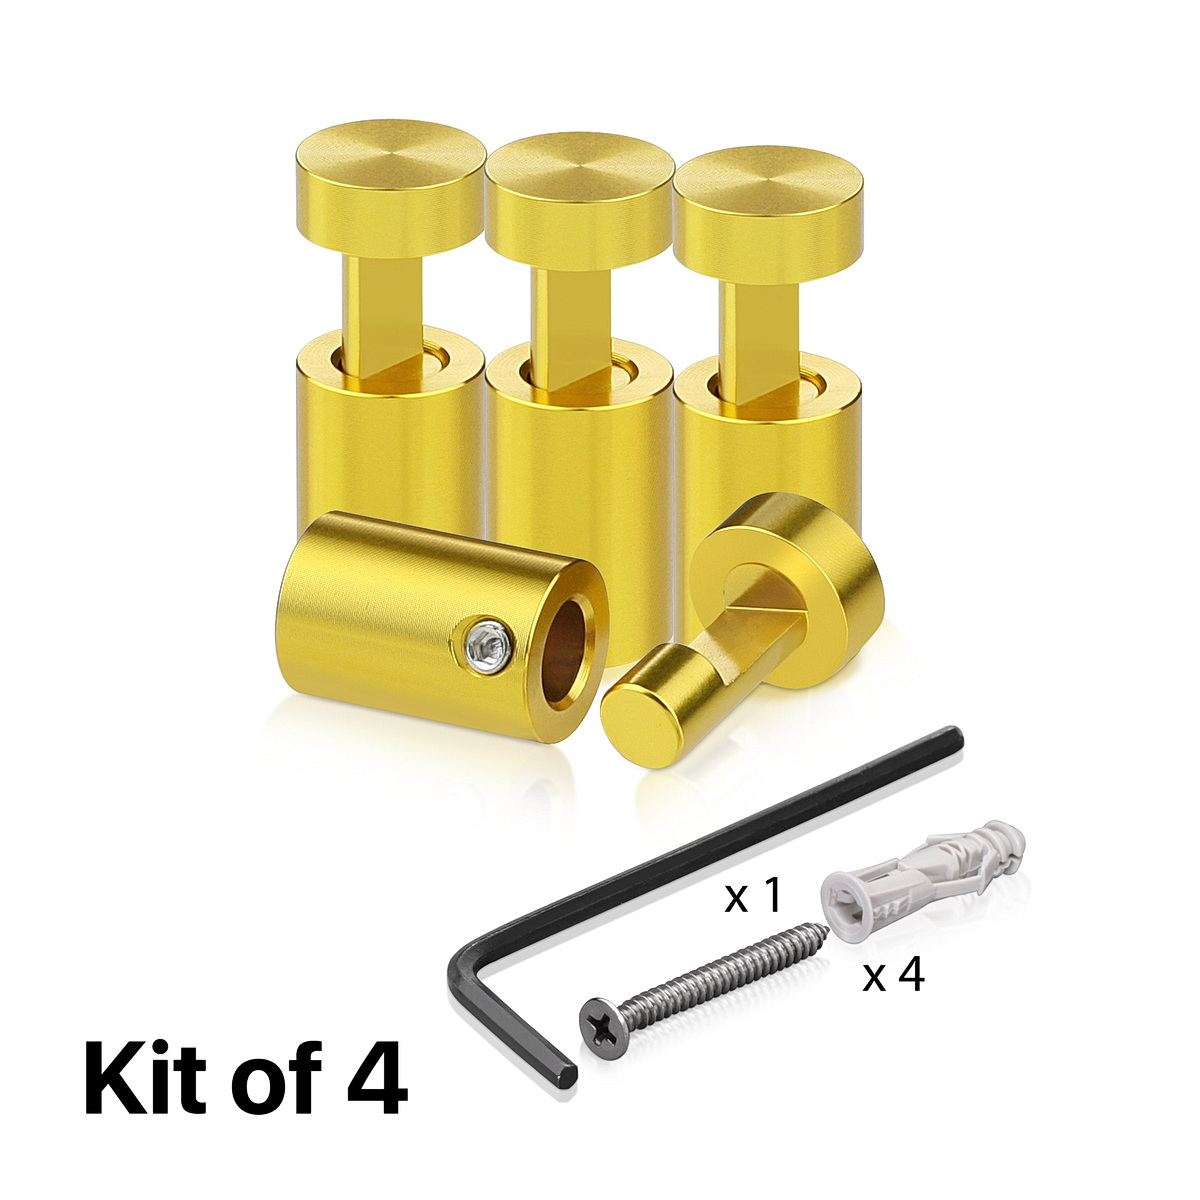 (Set of 4) 1/2'' Diameter X 3/4''  Barrel Length, Aluminum Gold Anodized Finish. Adjustable Edge Grip Standoff with (4) 2208Z Screw and (4) LANC1 Anchor  for concrete/drywall (For Inside Use Only)